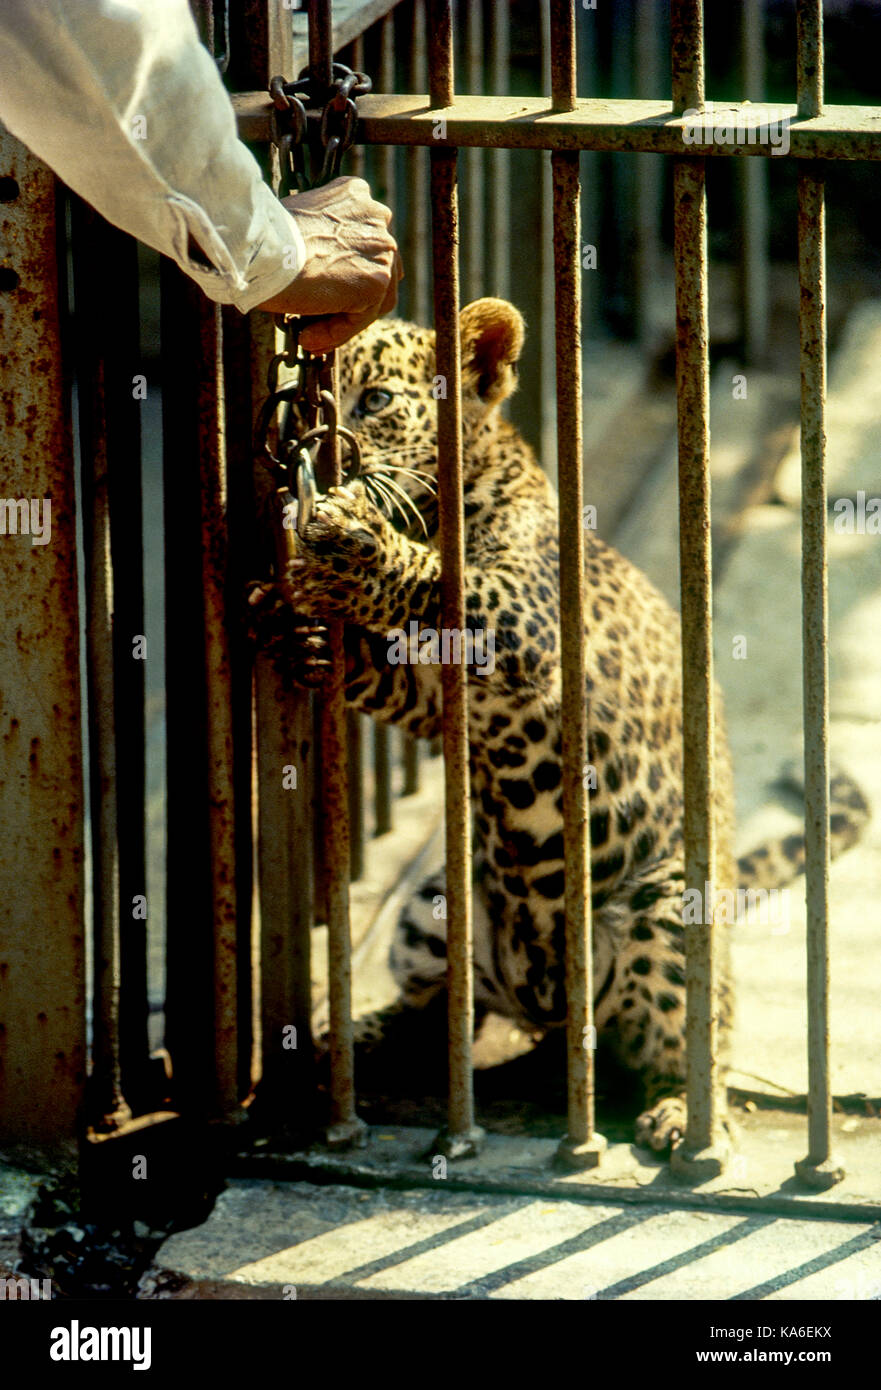 tiger cub playing with door lock, India, Asia - stp 258968 Stock Photo